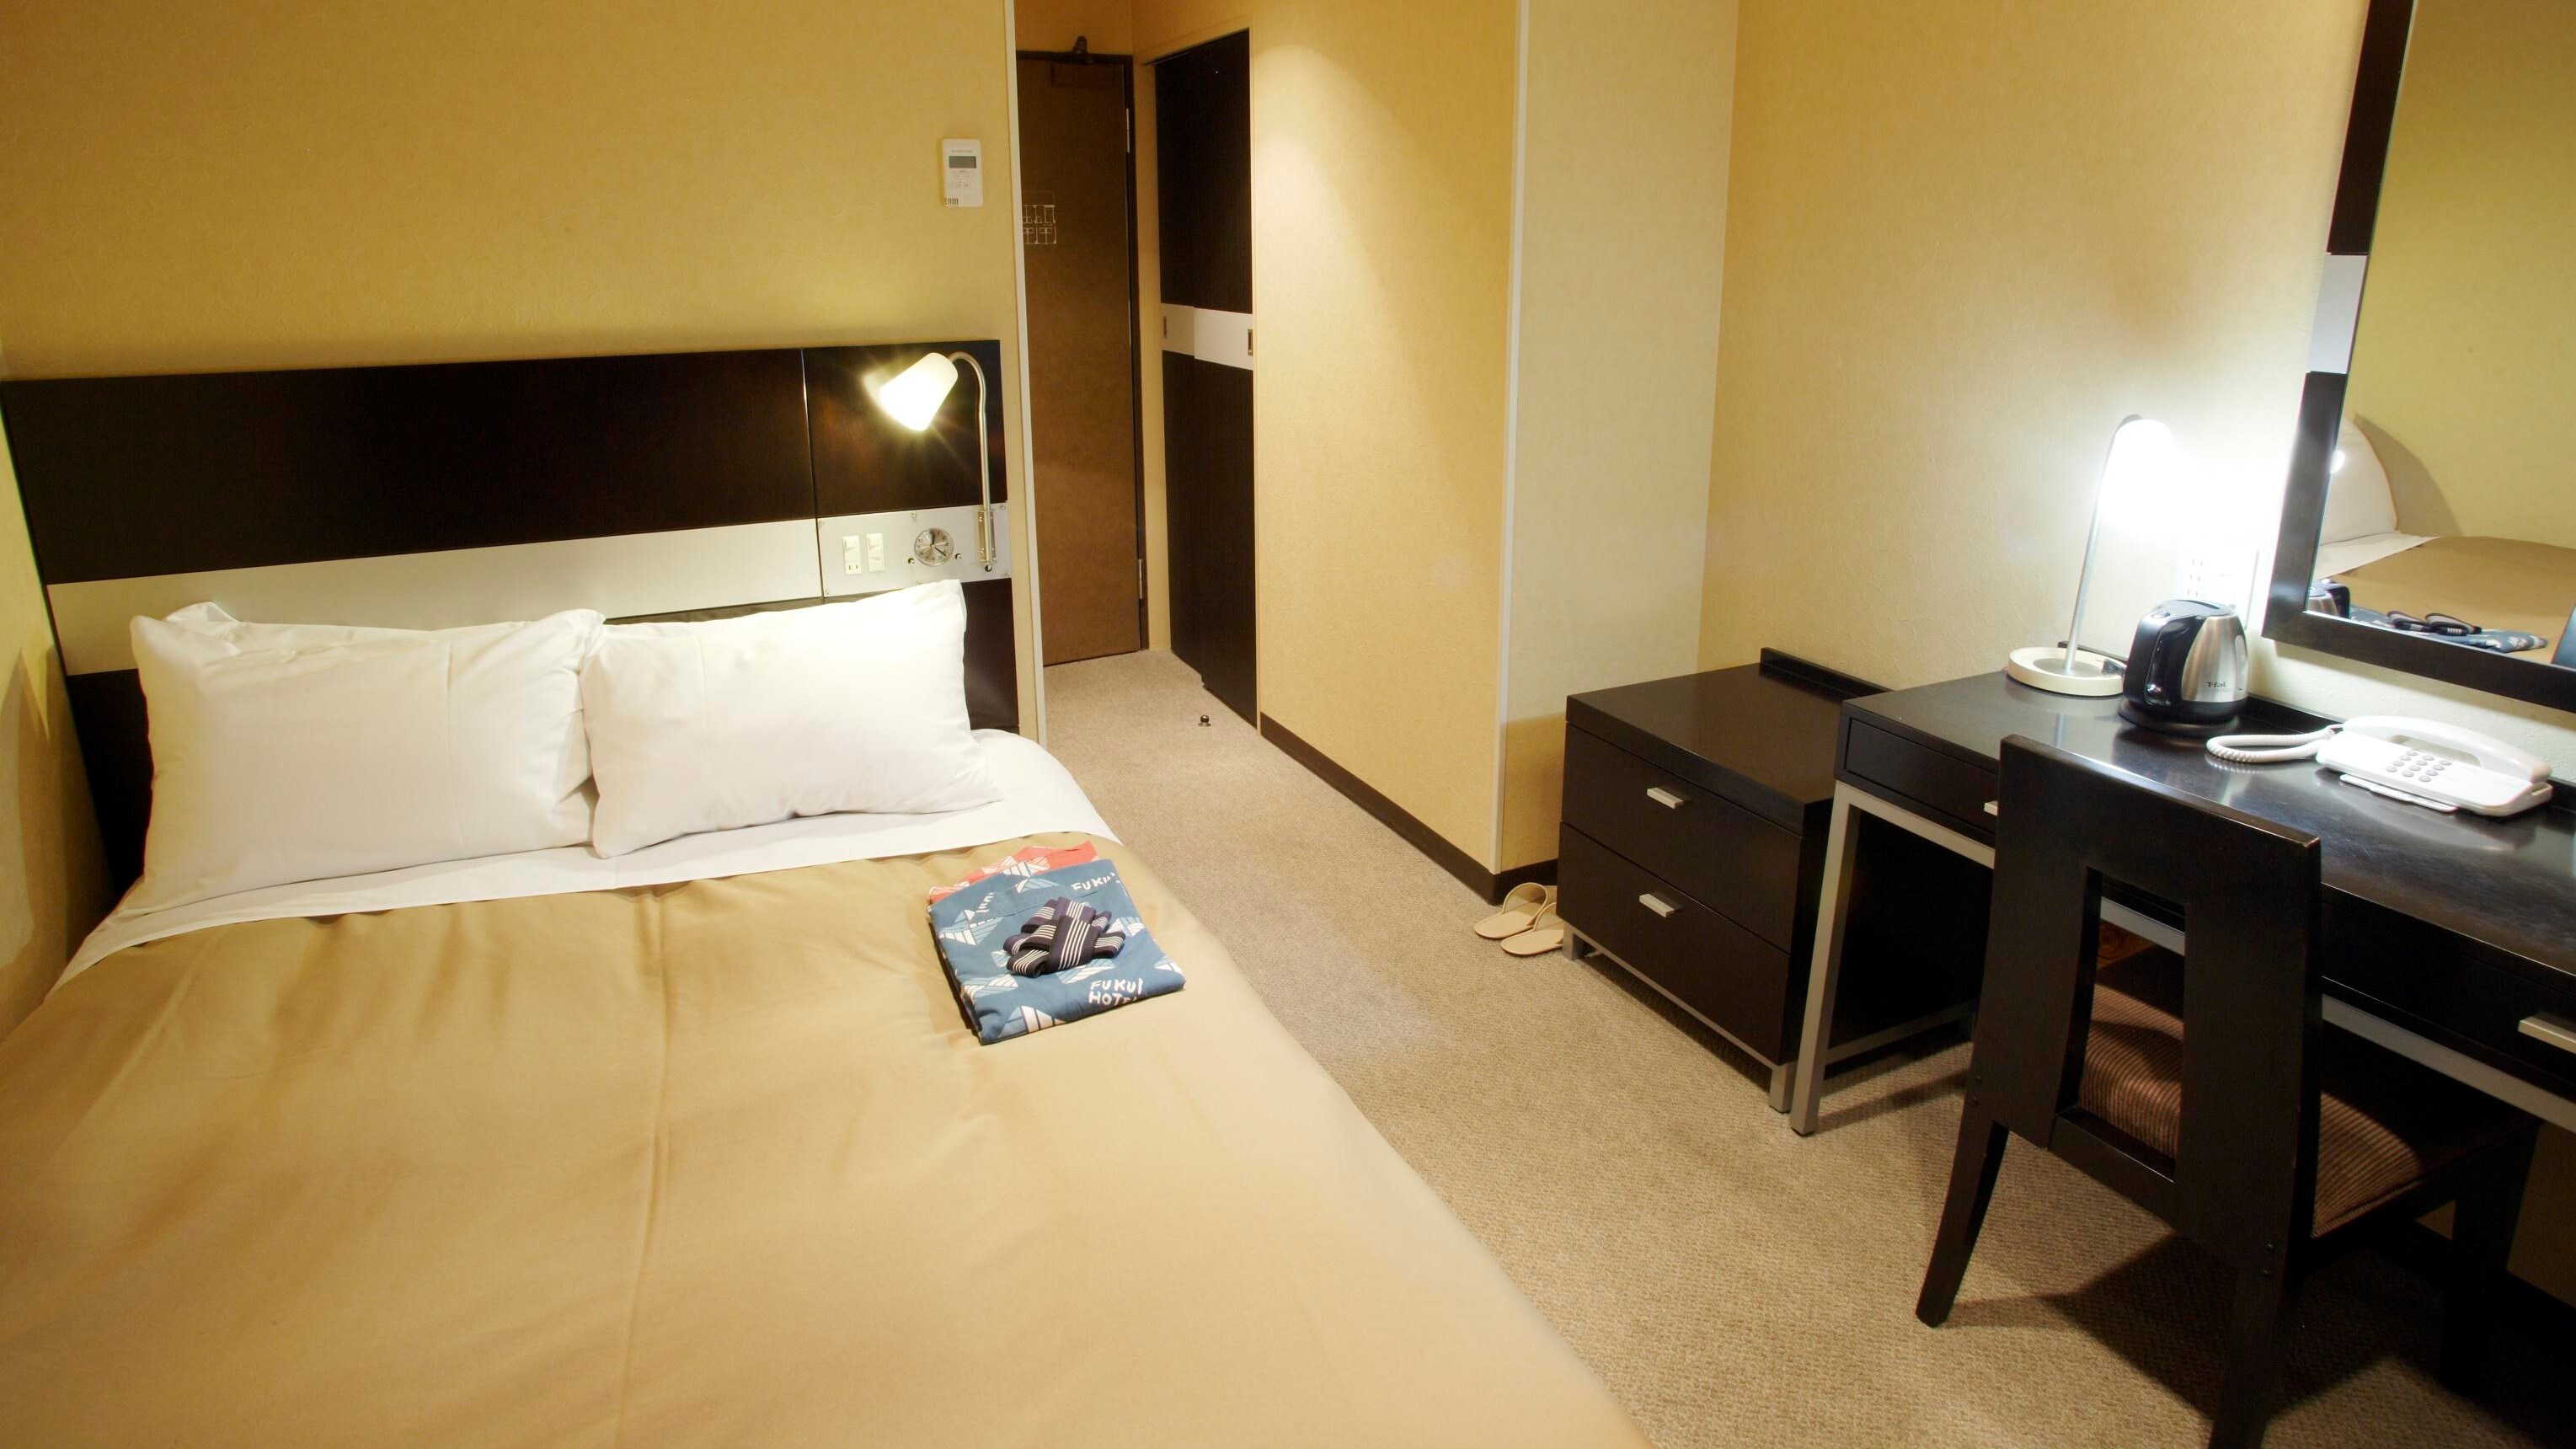 ◆ Double room / 1 or 2 night trip. From couples to couples, please use it to commemorate your trip. (Example of guest room)